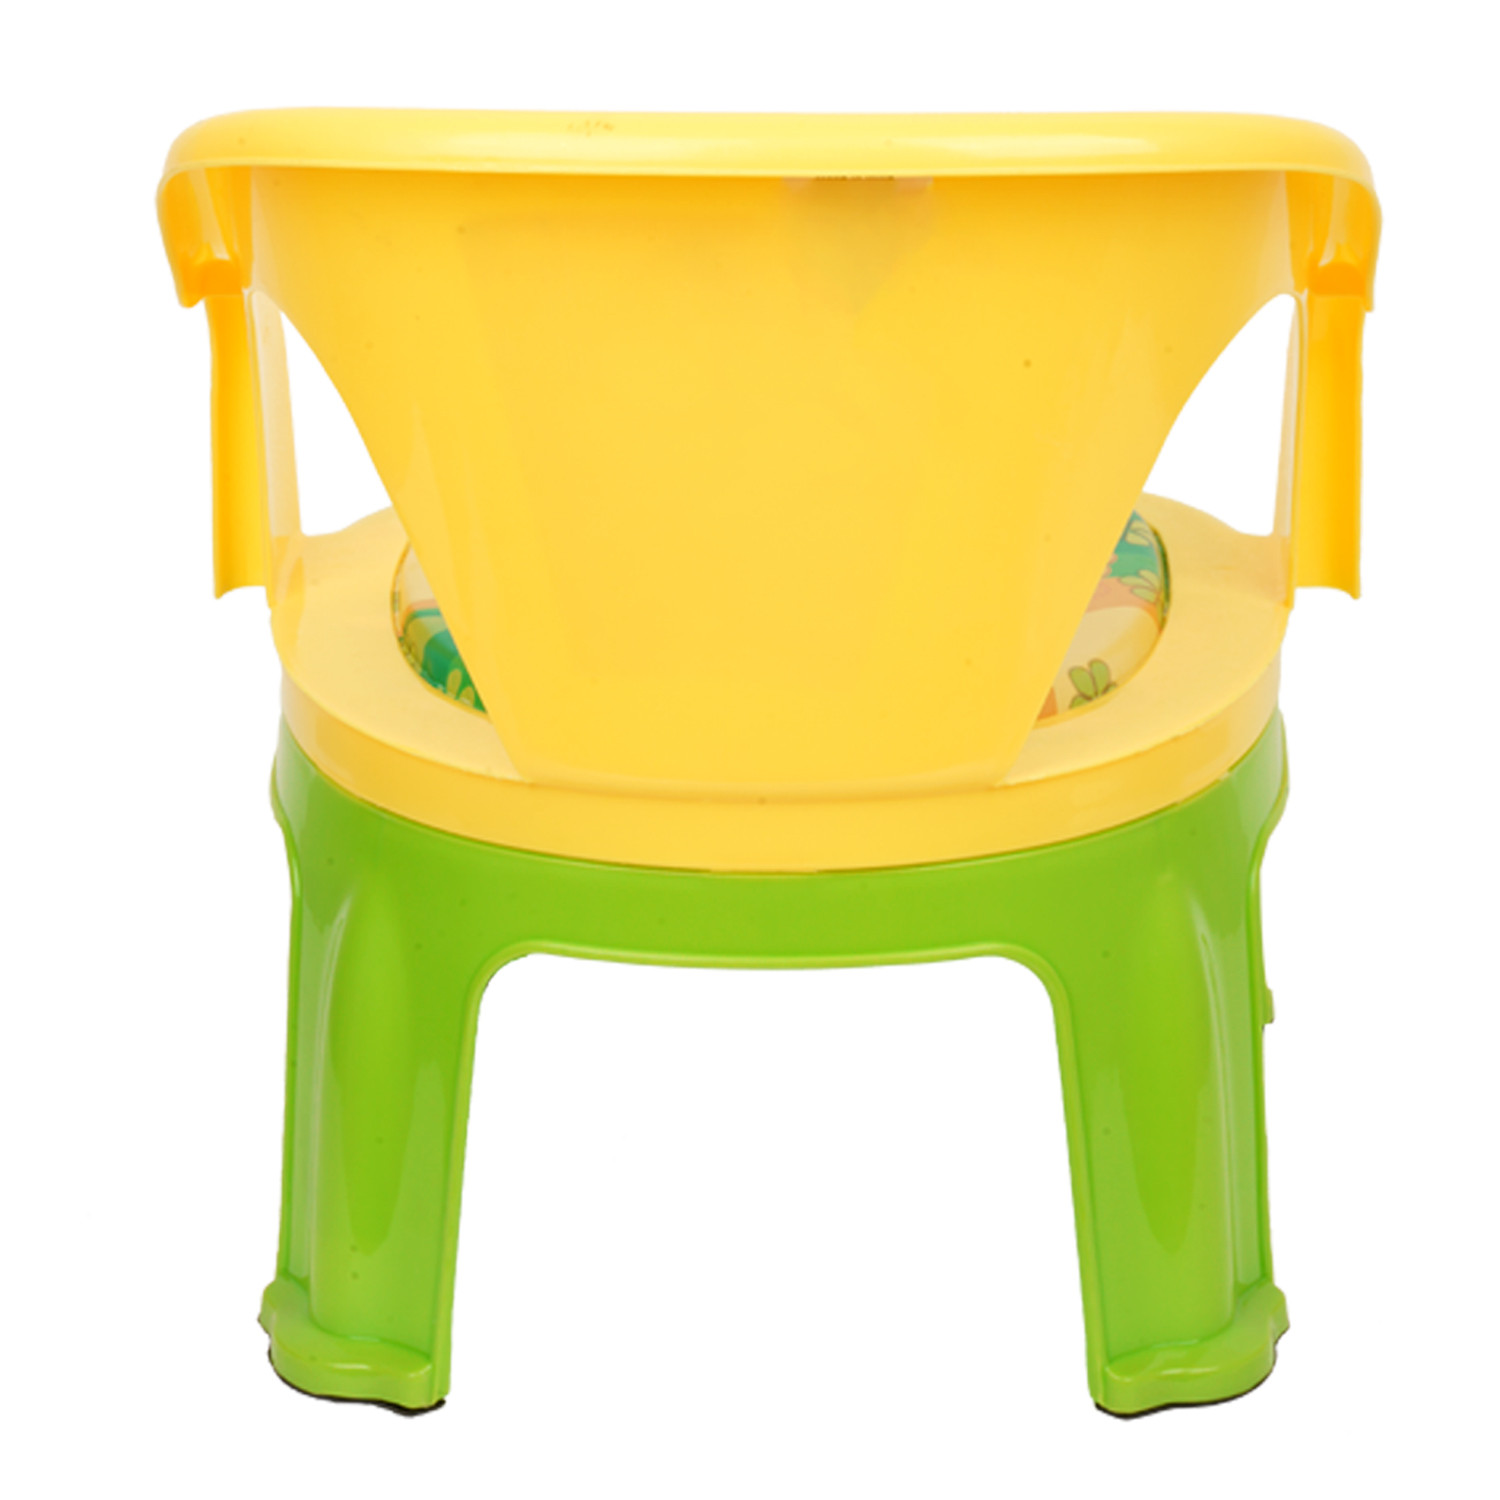 Kuber Industries Disney Pooh Kids Chair | Plastic Foldable Kids Chair | Chair for Kidsroom | School Study Stool | Baby Stool | Indoor or Outdoor Stool for Kids | Capacity 30 Kg | Yellow & Green